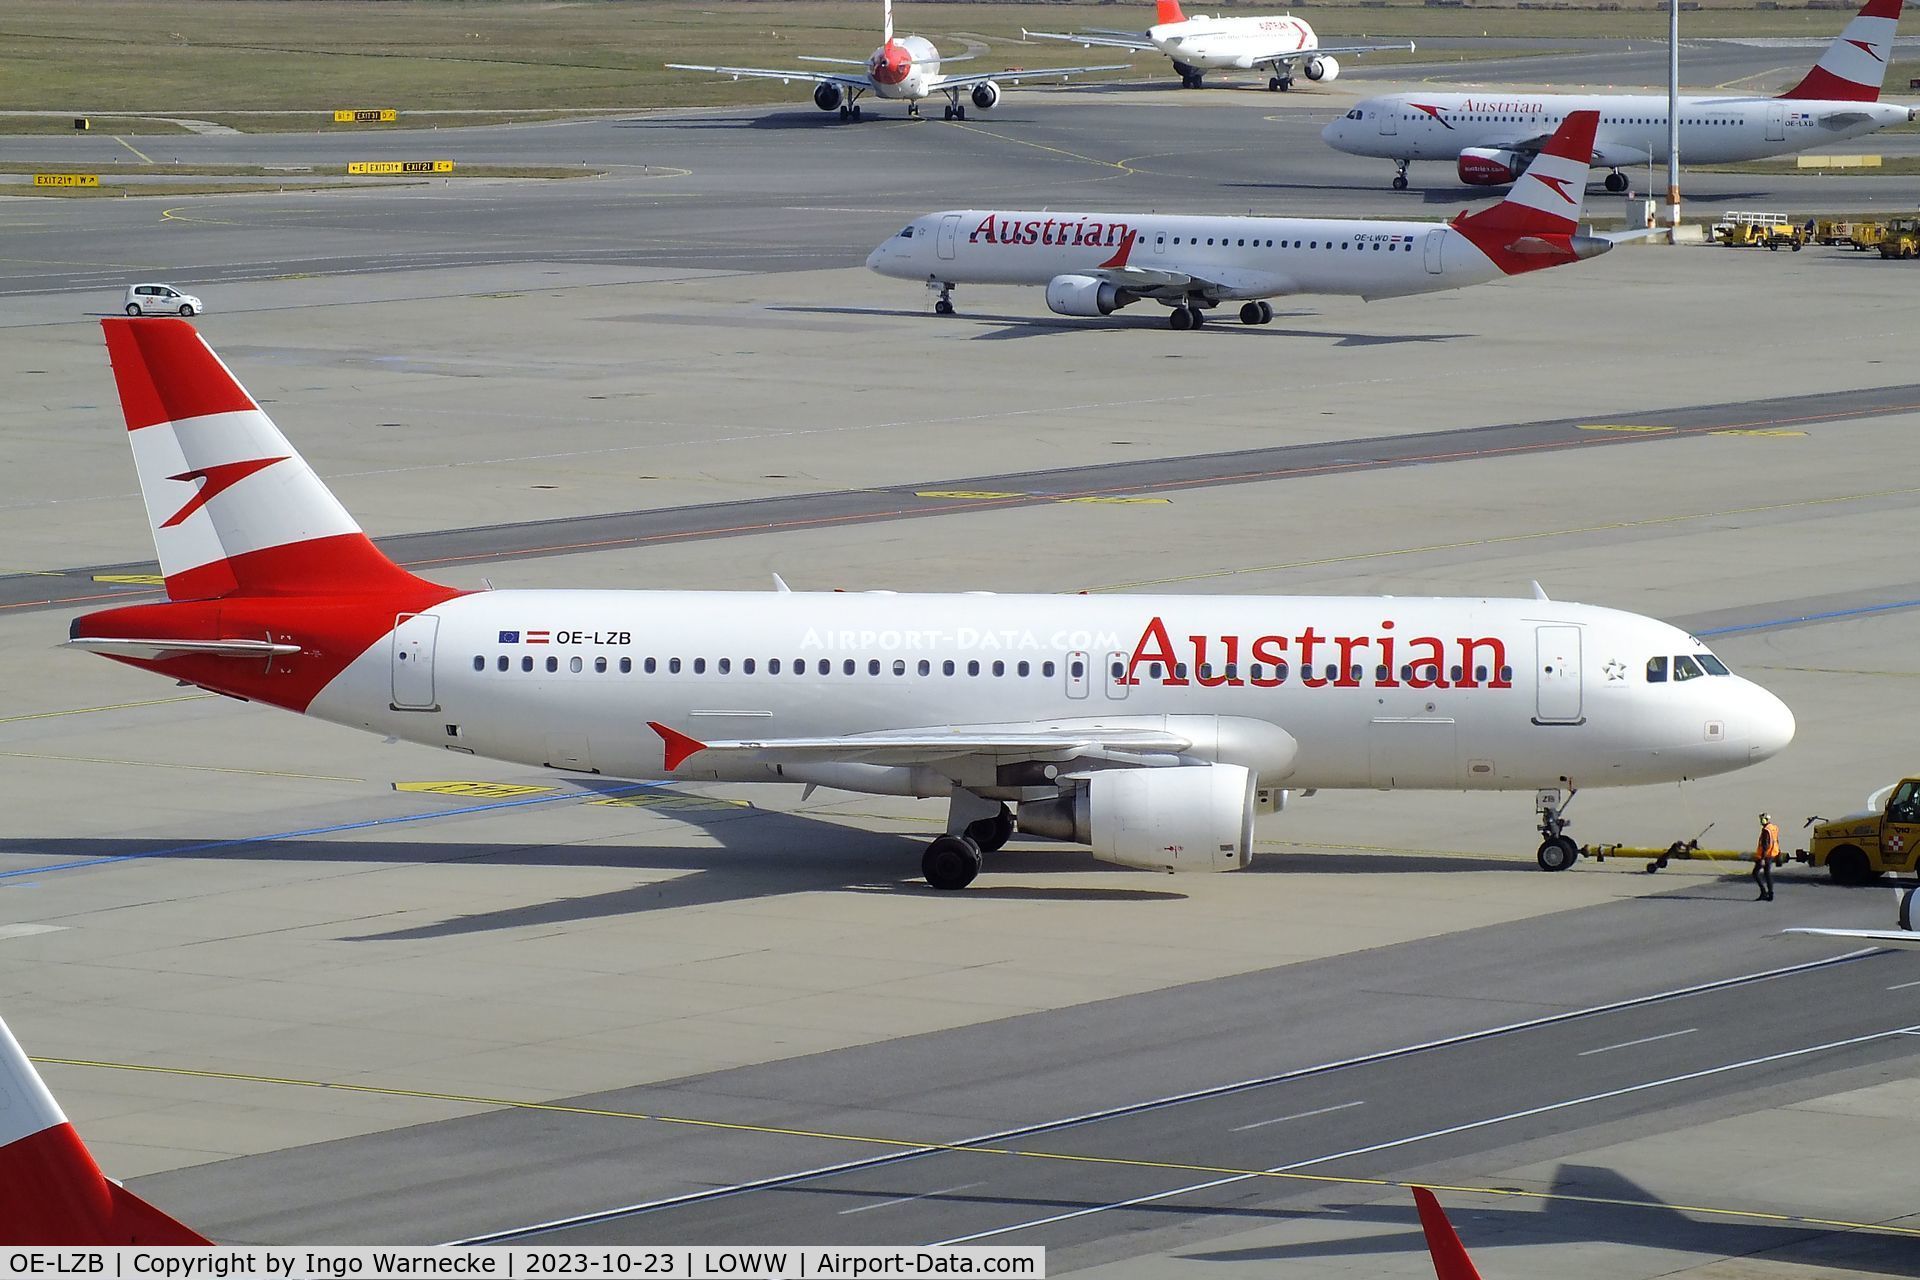 OE-LZB, 2007 Airbus A320-214 C/N 3268, Airbus A320-214 of Austrian Airlines at Wien-Schwechat airport